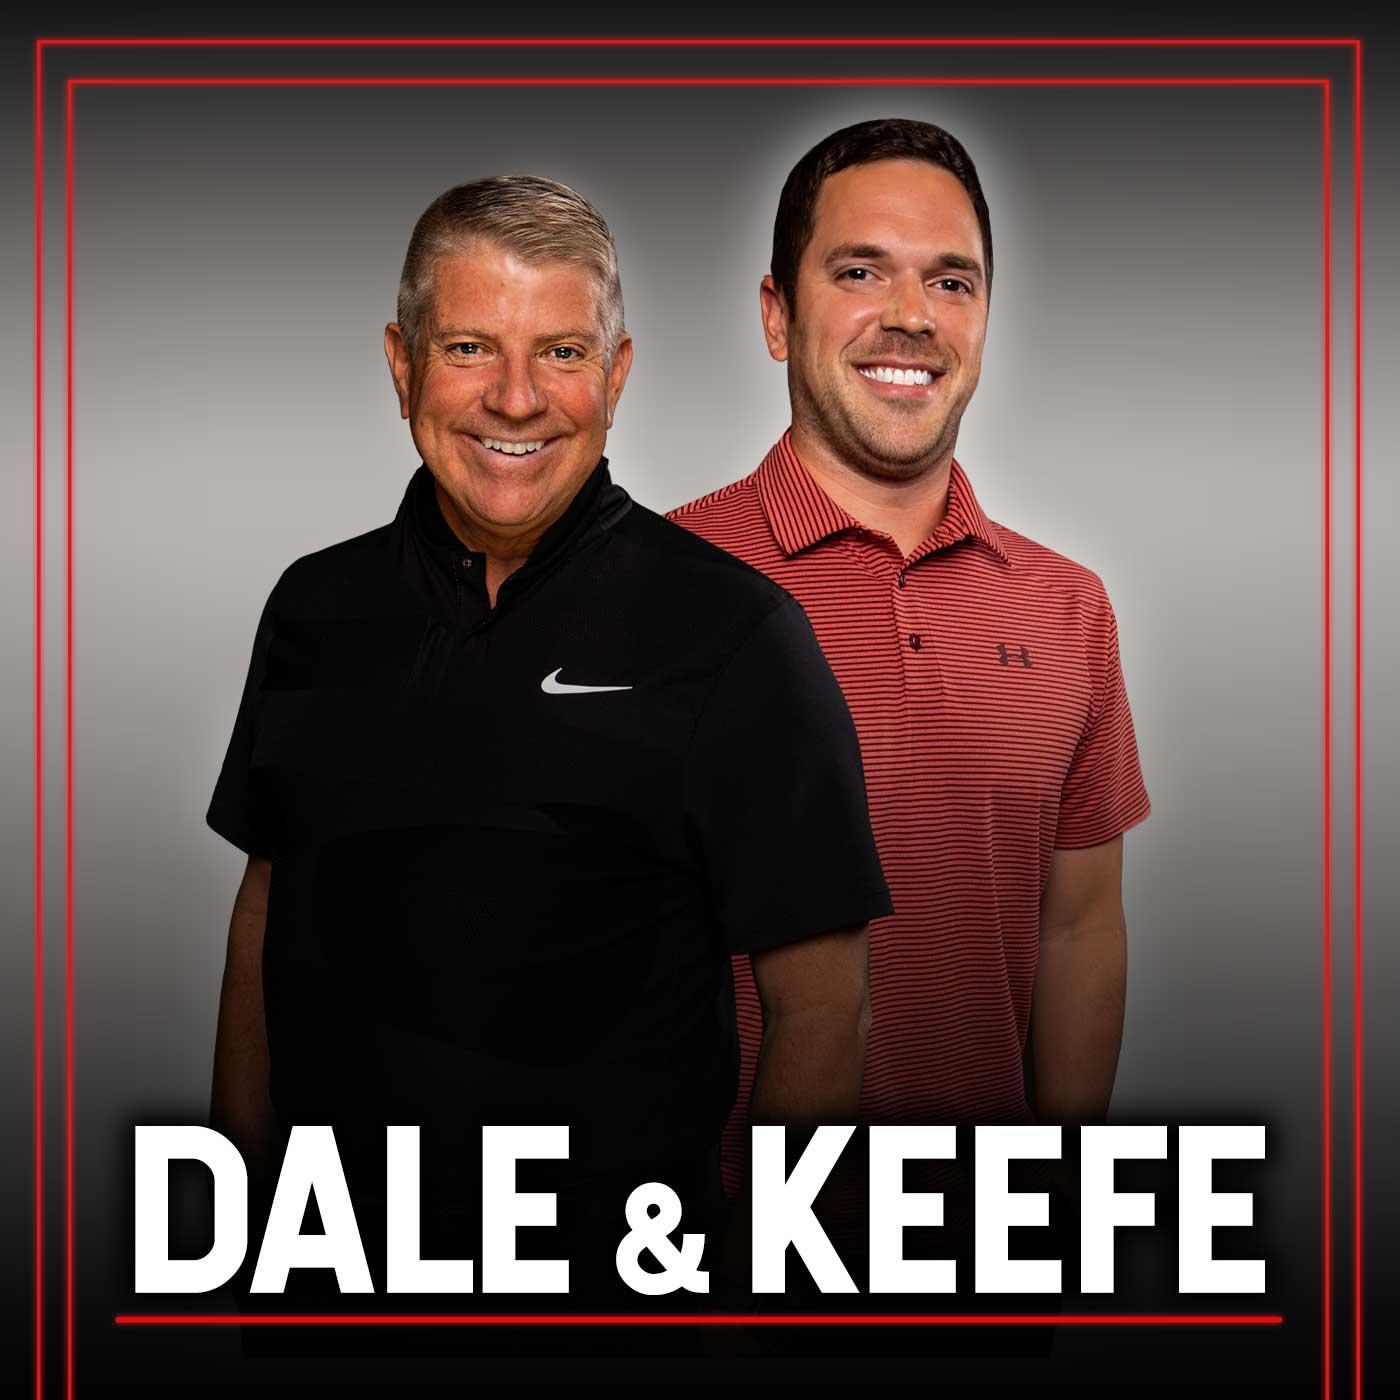 Dale & Keefe - What’s wrong with the Patriots offense? Josh Gordon emerging as one of Brady’s top targets